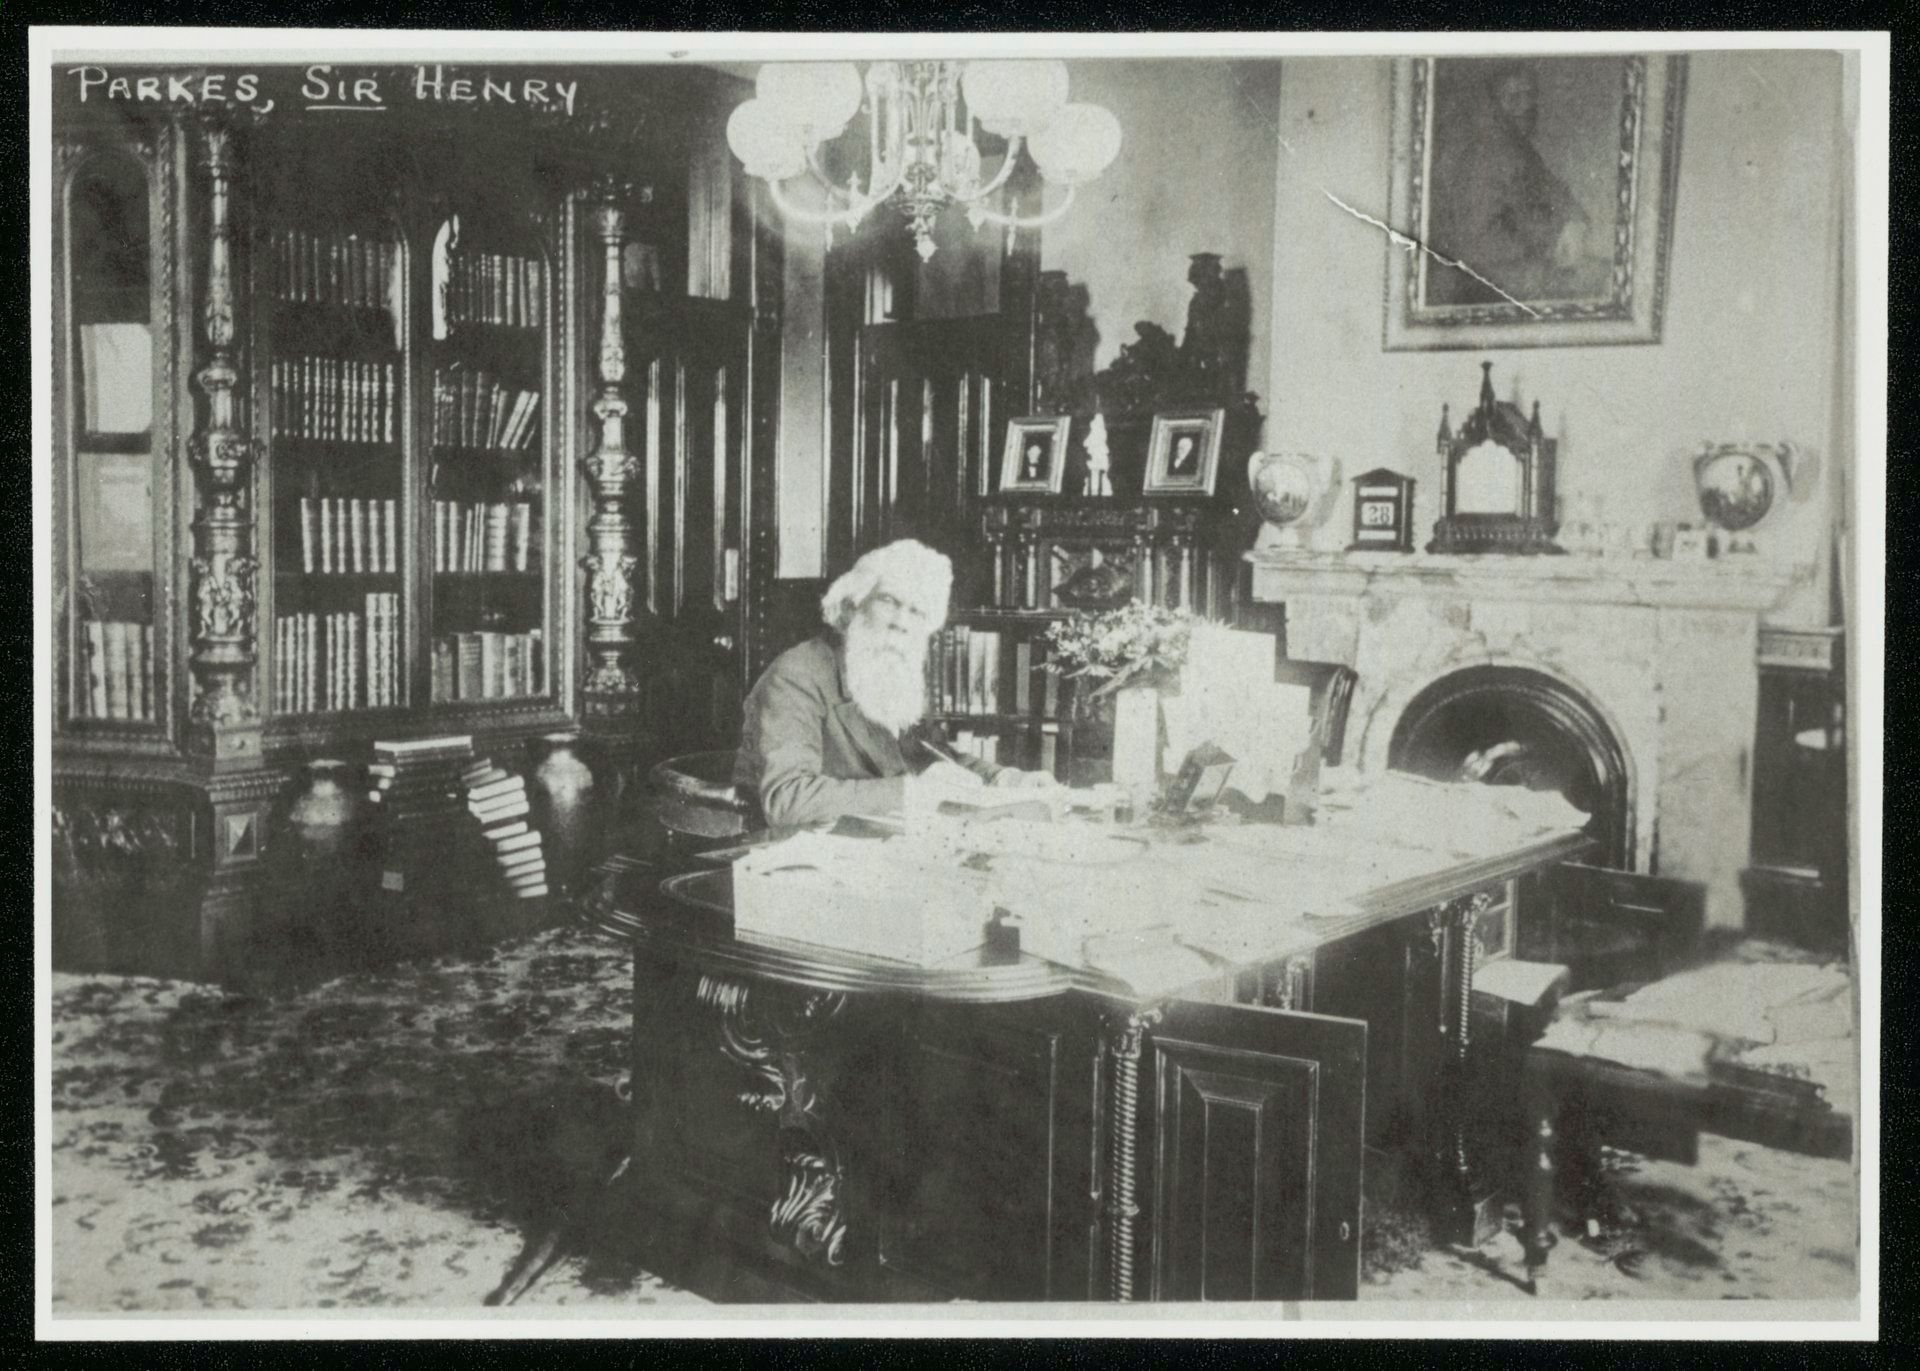 A man sits at a desk in a large office surrounded by bookshelves and a fireplace